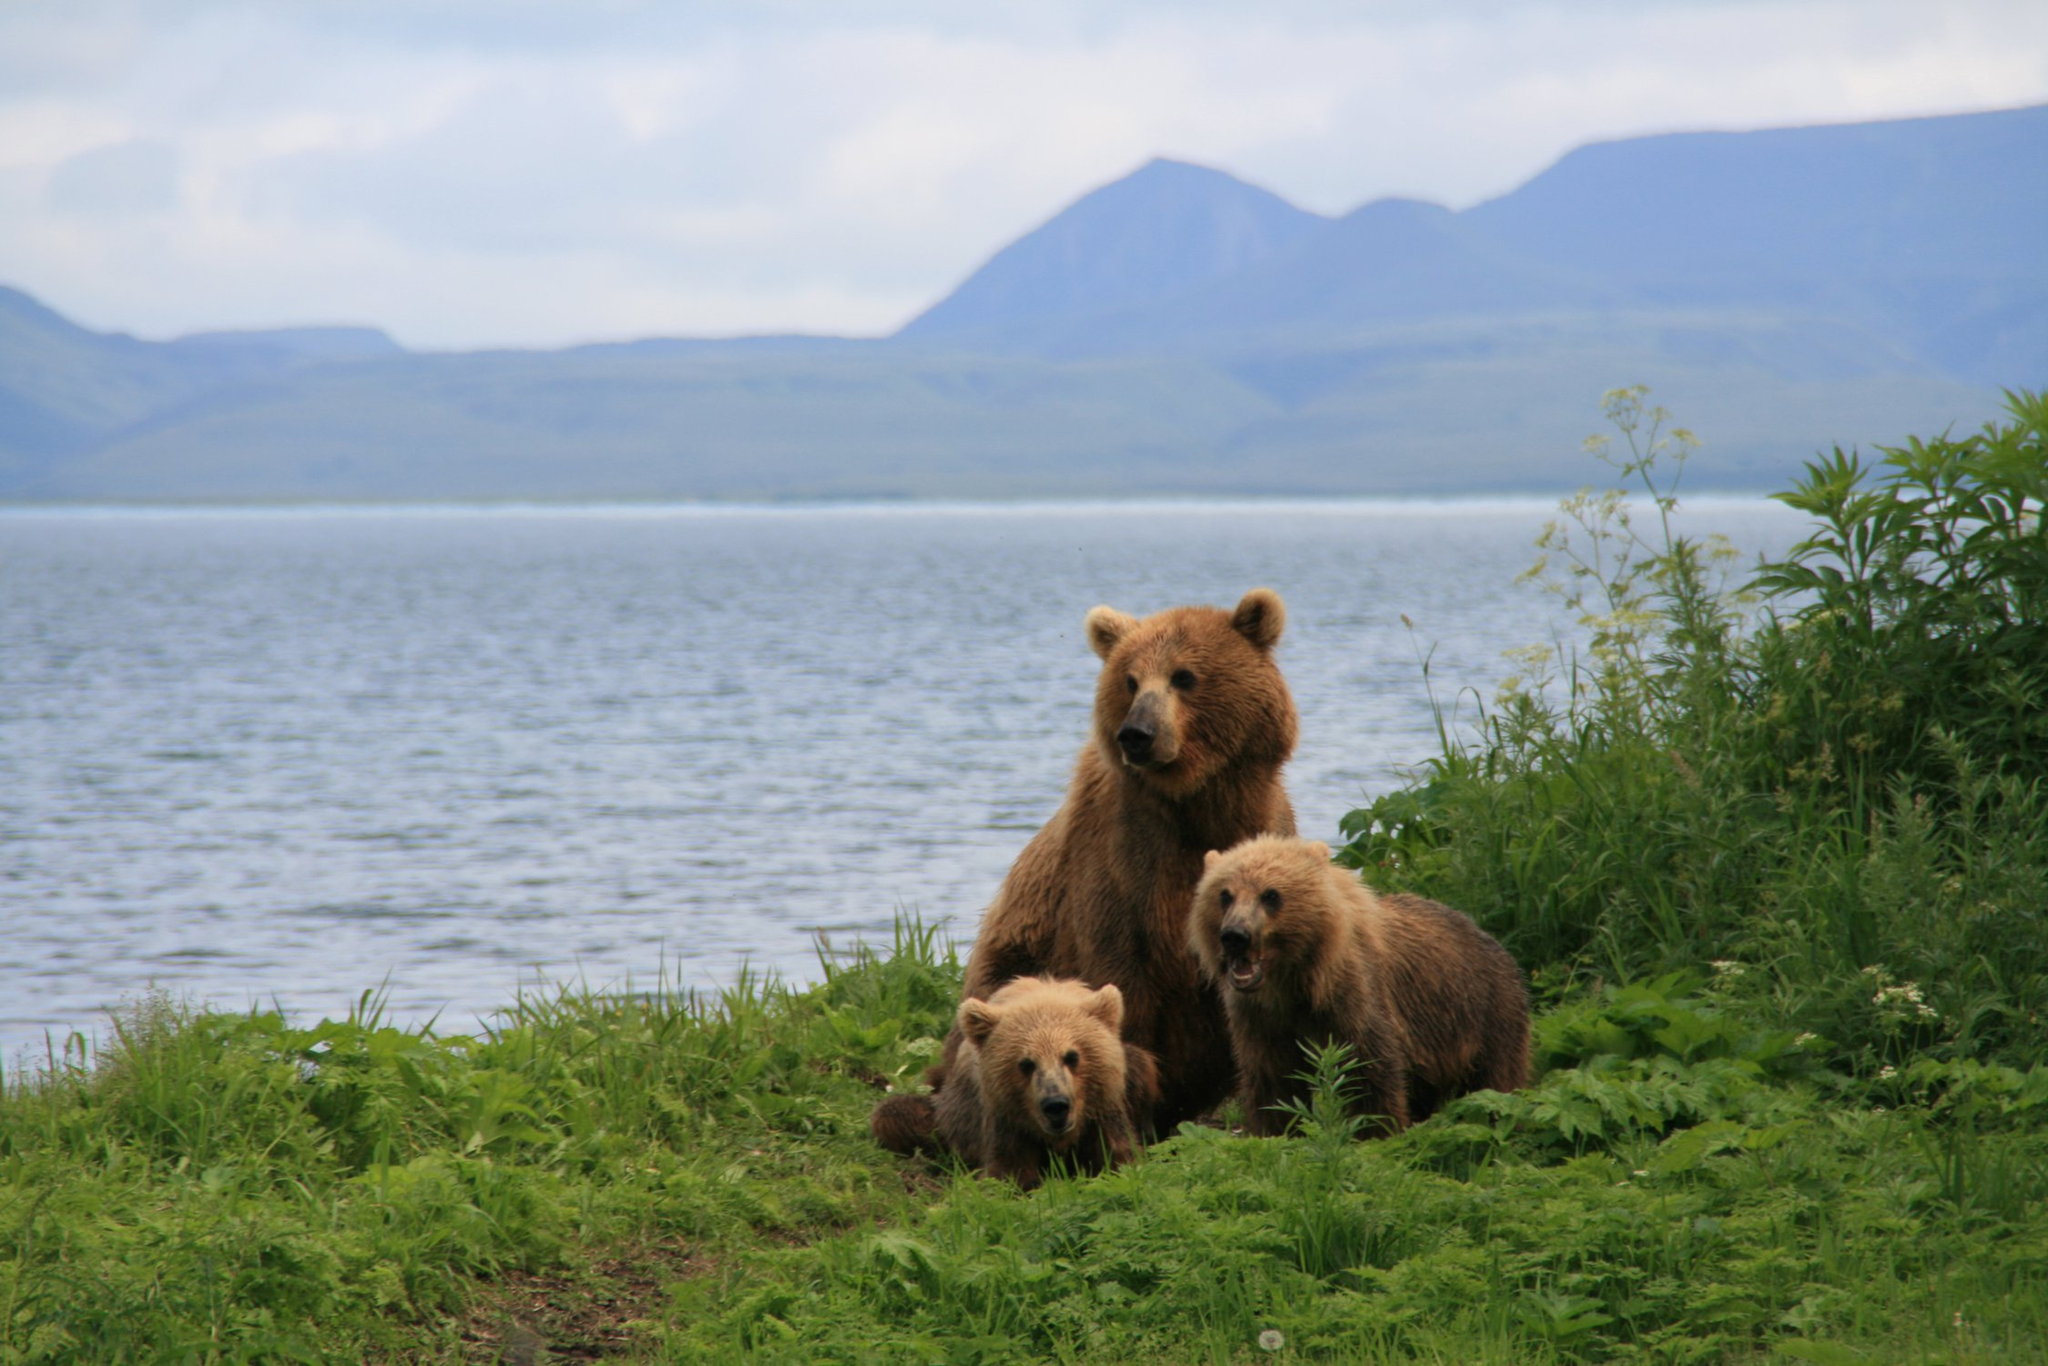 Family matters... - The Bears, Brown bears, Teddy bears, Kamchatka, Kuril lake, Reserves and sanctuaries, The national geographic, The photo, Longpost